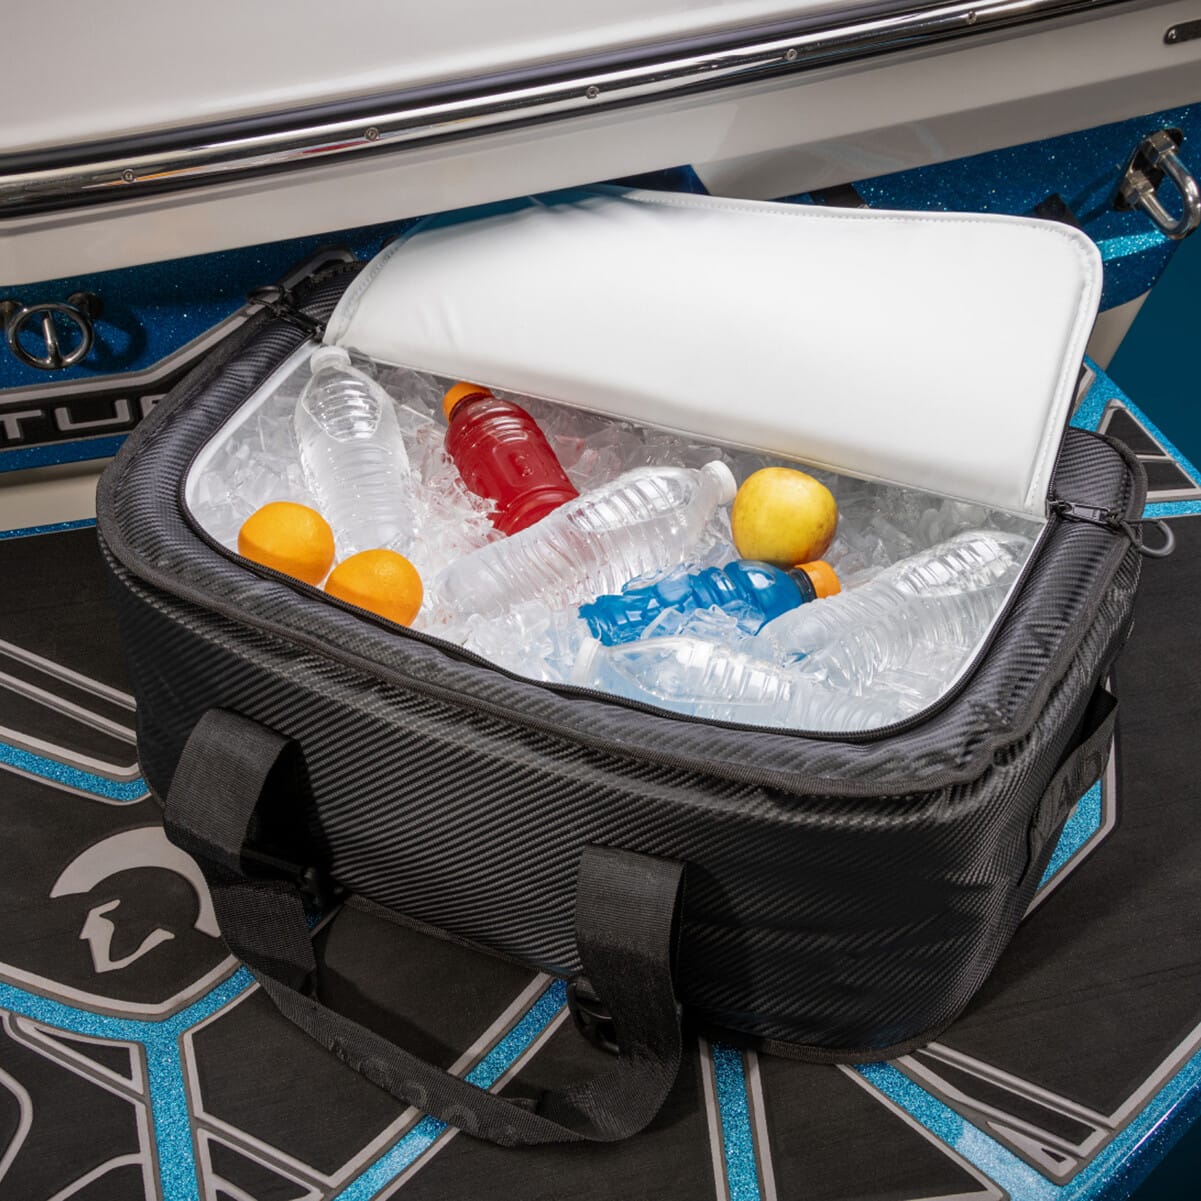 A cooler bag filled with ice, plastic bottles of water, sports drinks, and oranges, placed on a boat's deck. The lid of the cooler is partially open.